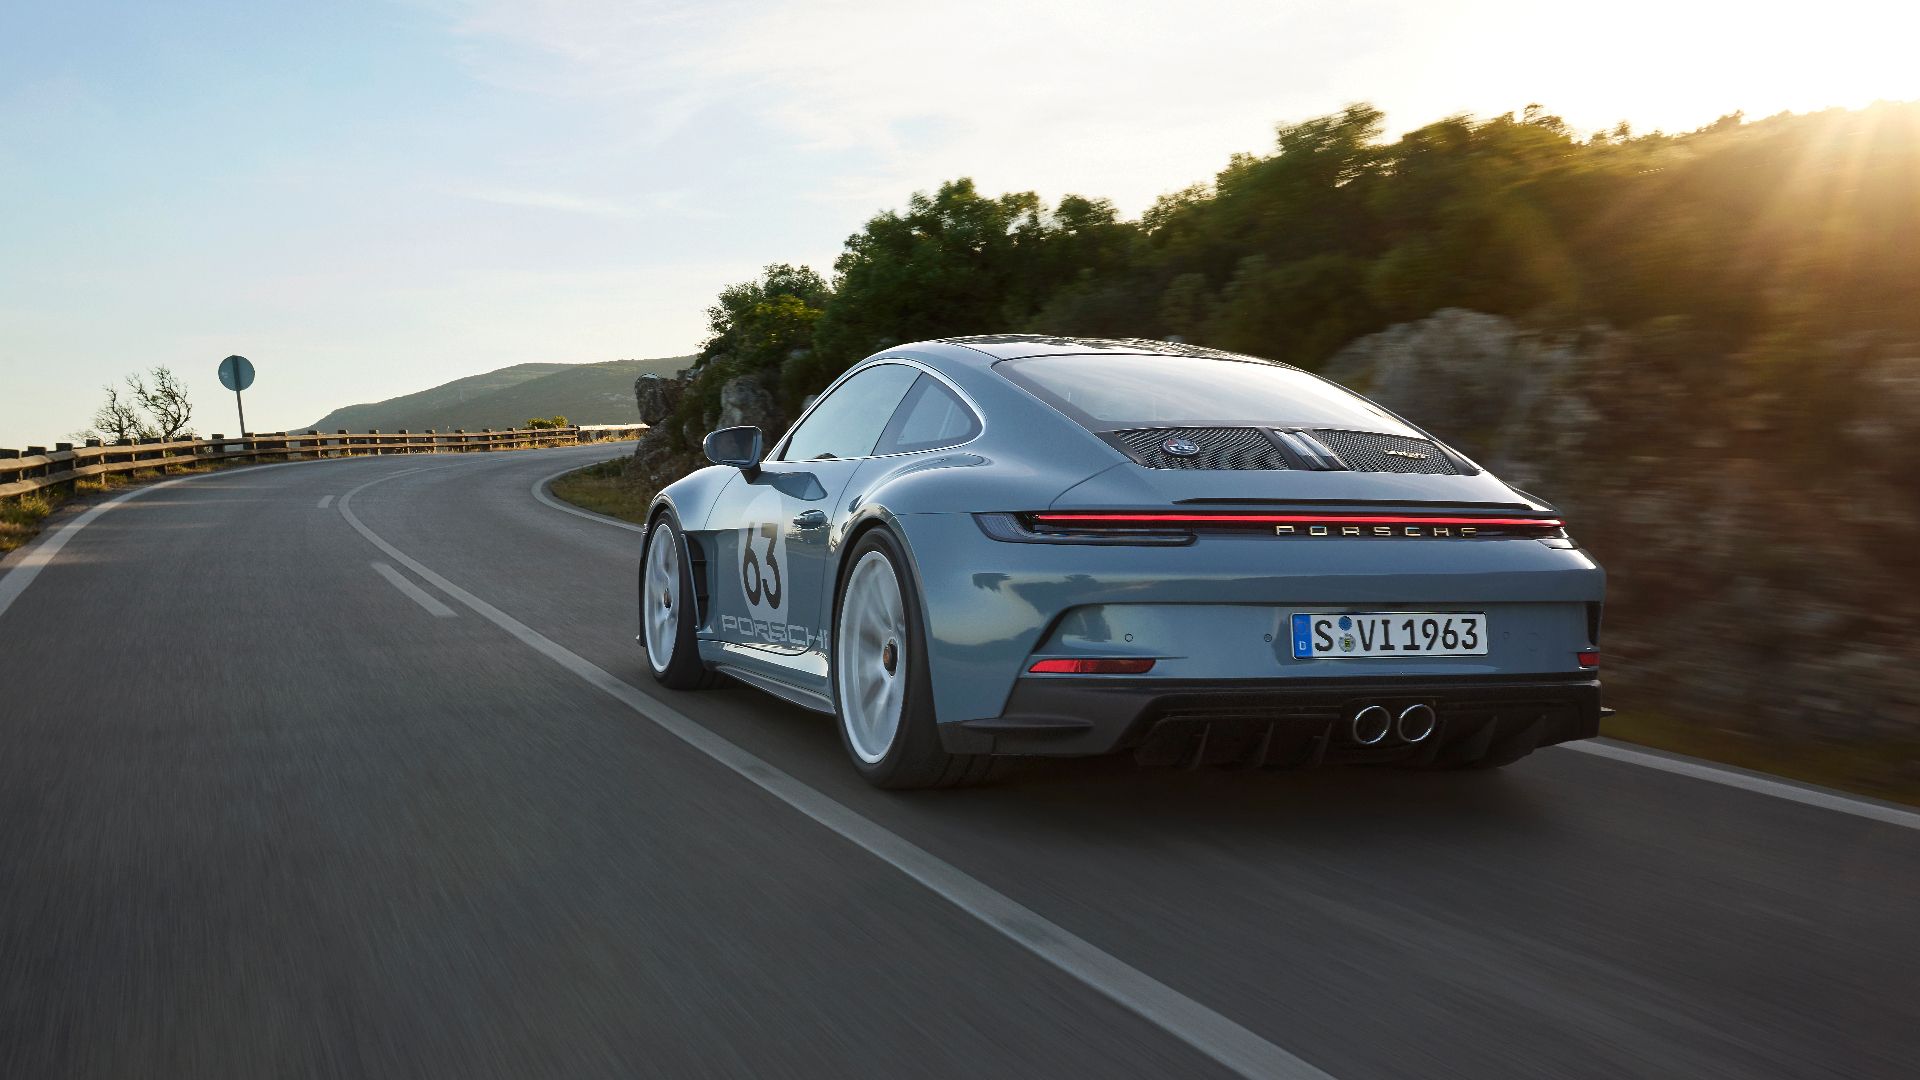 Here's What To Expect From The Summer Launch Of The Porsche 911 Hybrid